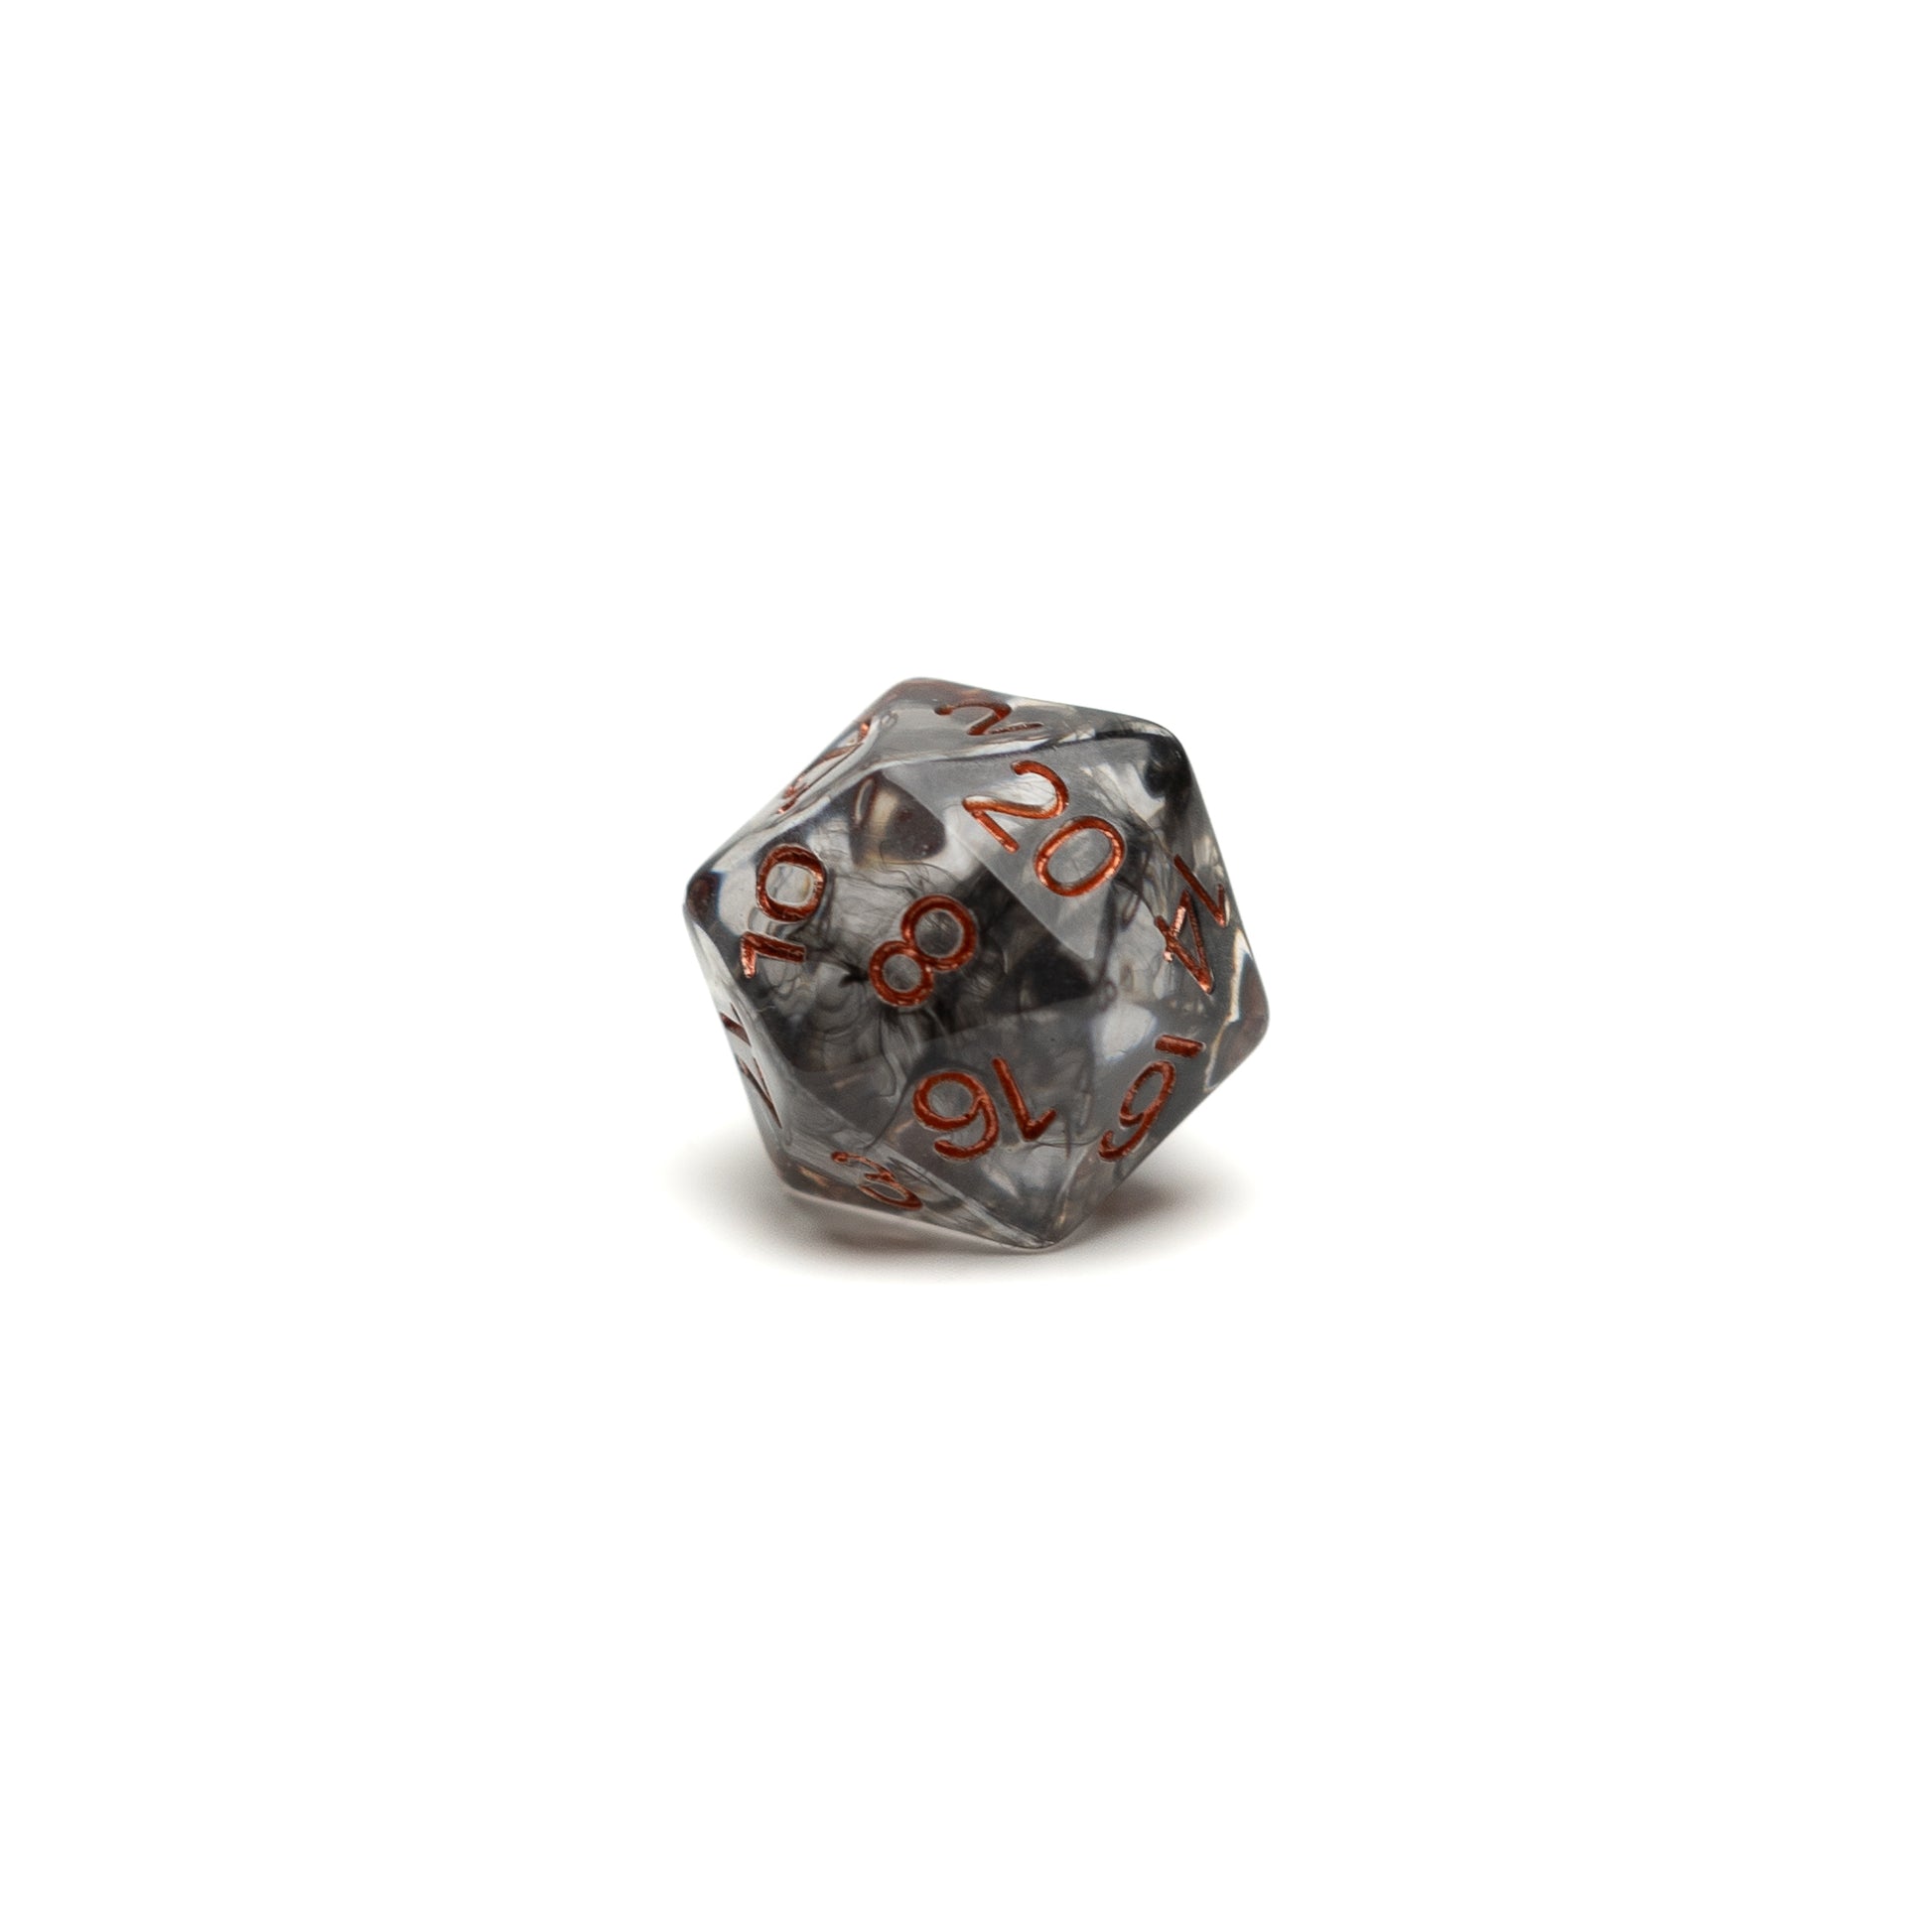 Roll Britannia Jeff Silverbow Dungeons and Dragons D20 Dice with Smoke and Fire Aesthetic